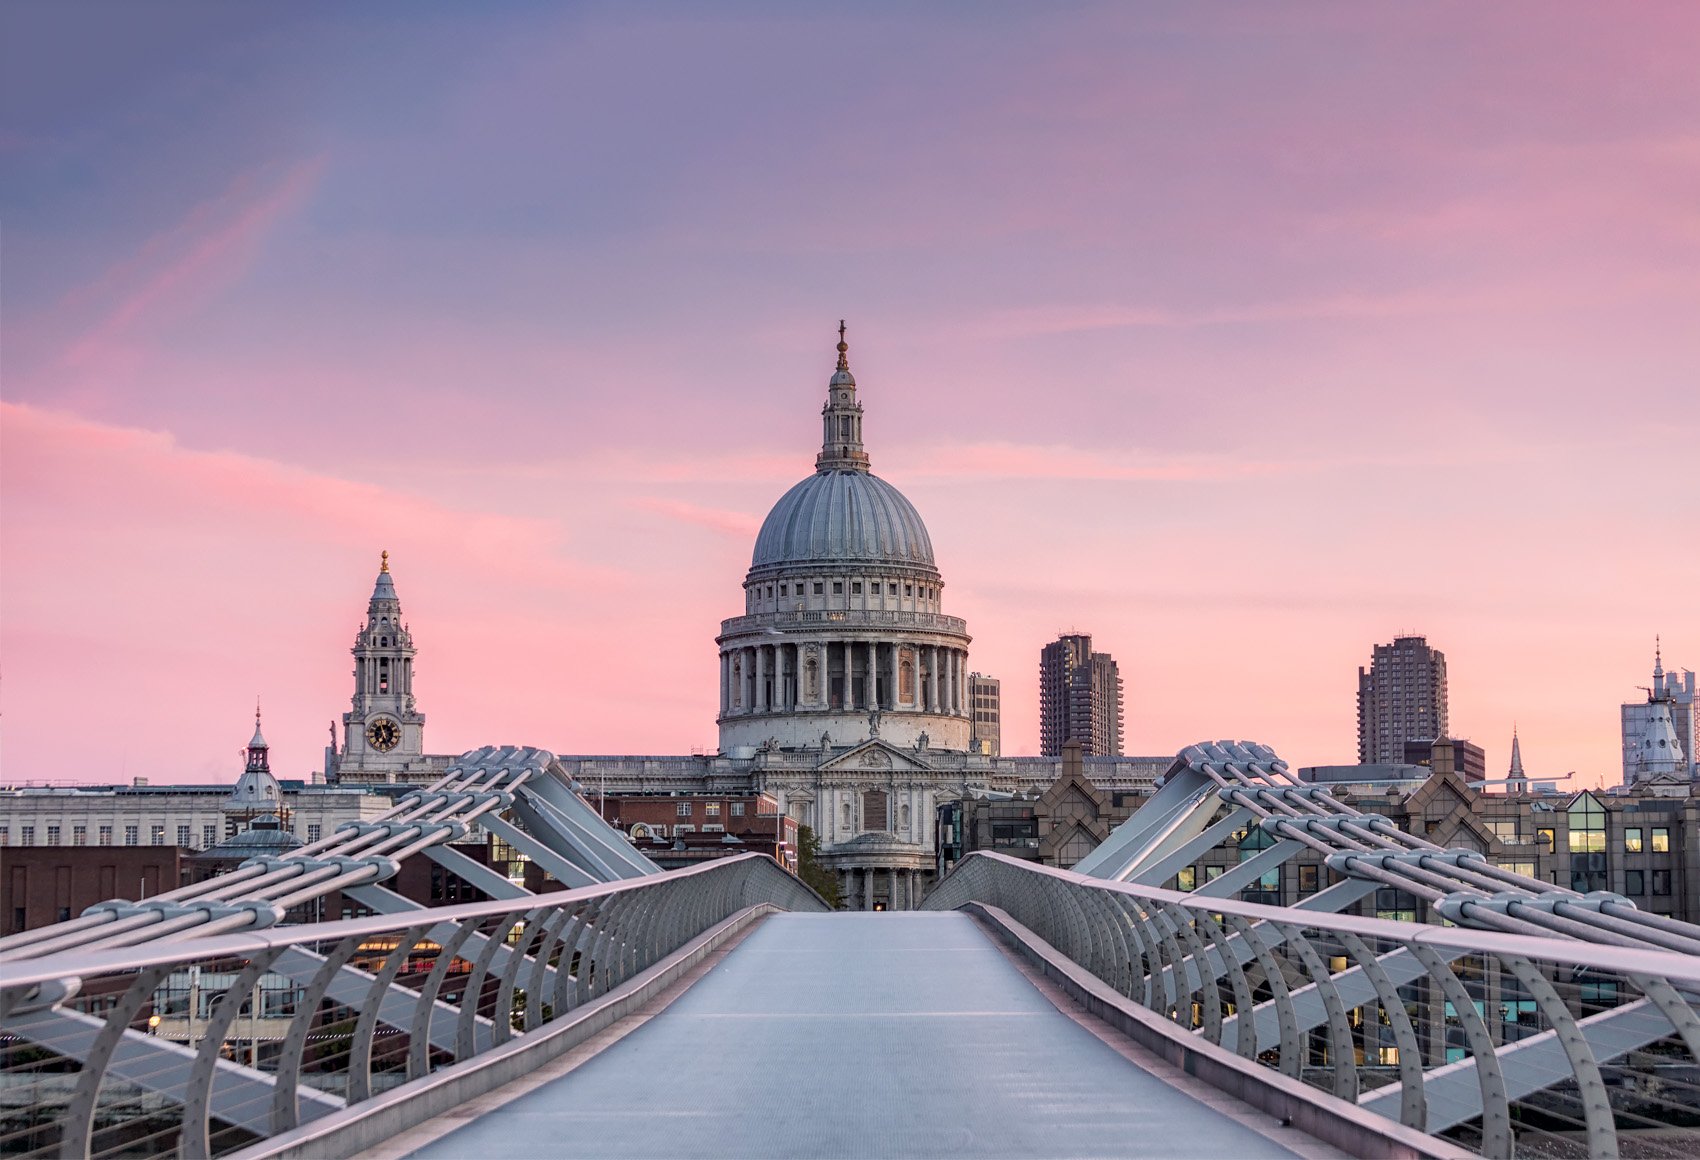 London's Millennium Bridge in the foreground with St Paul's Cathedral in the background at sunset